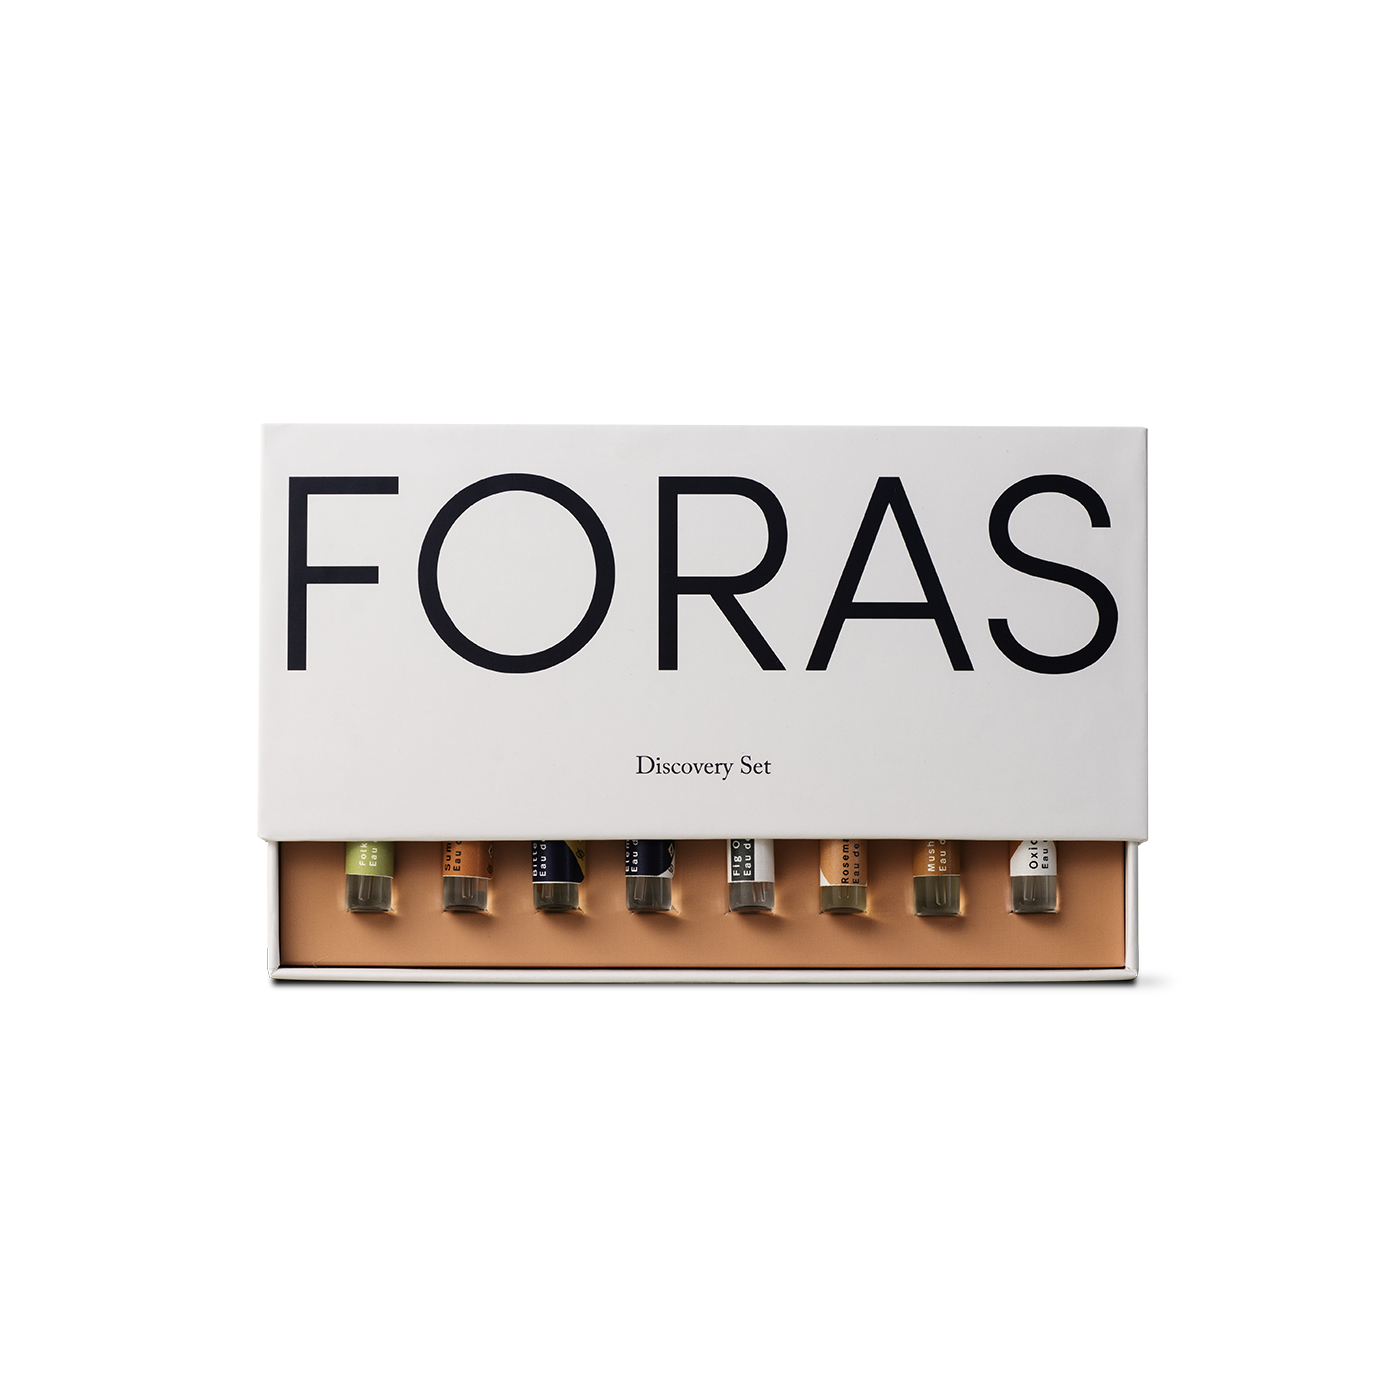 Foras - Discovery Set Sample Perfumes